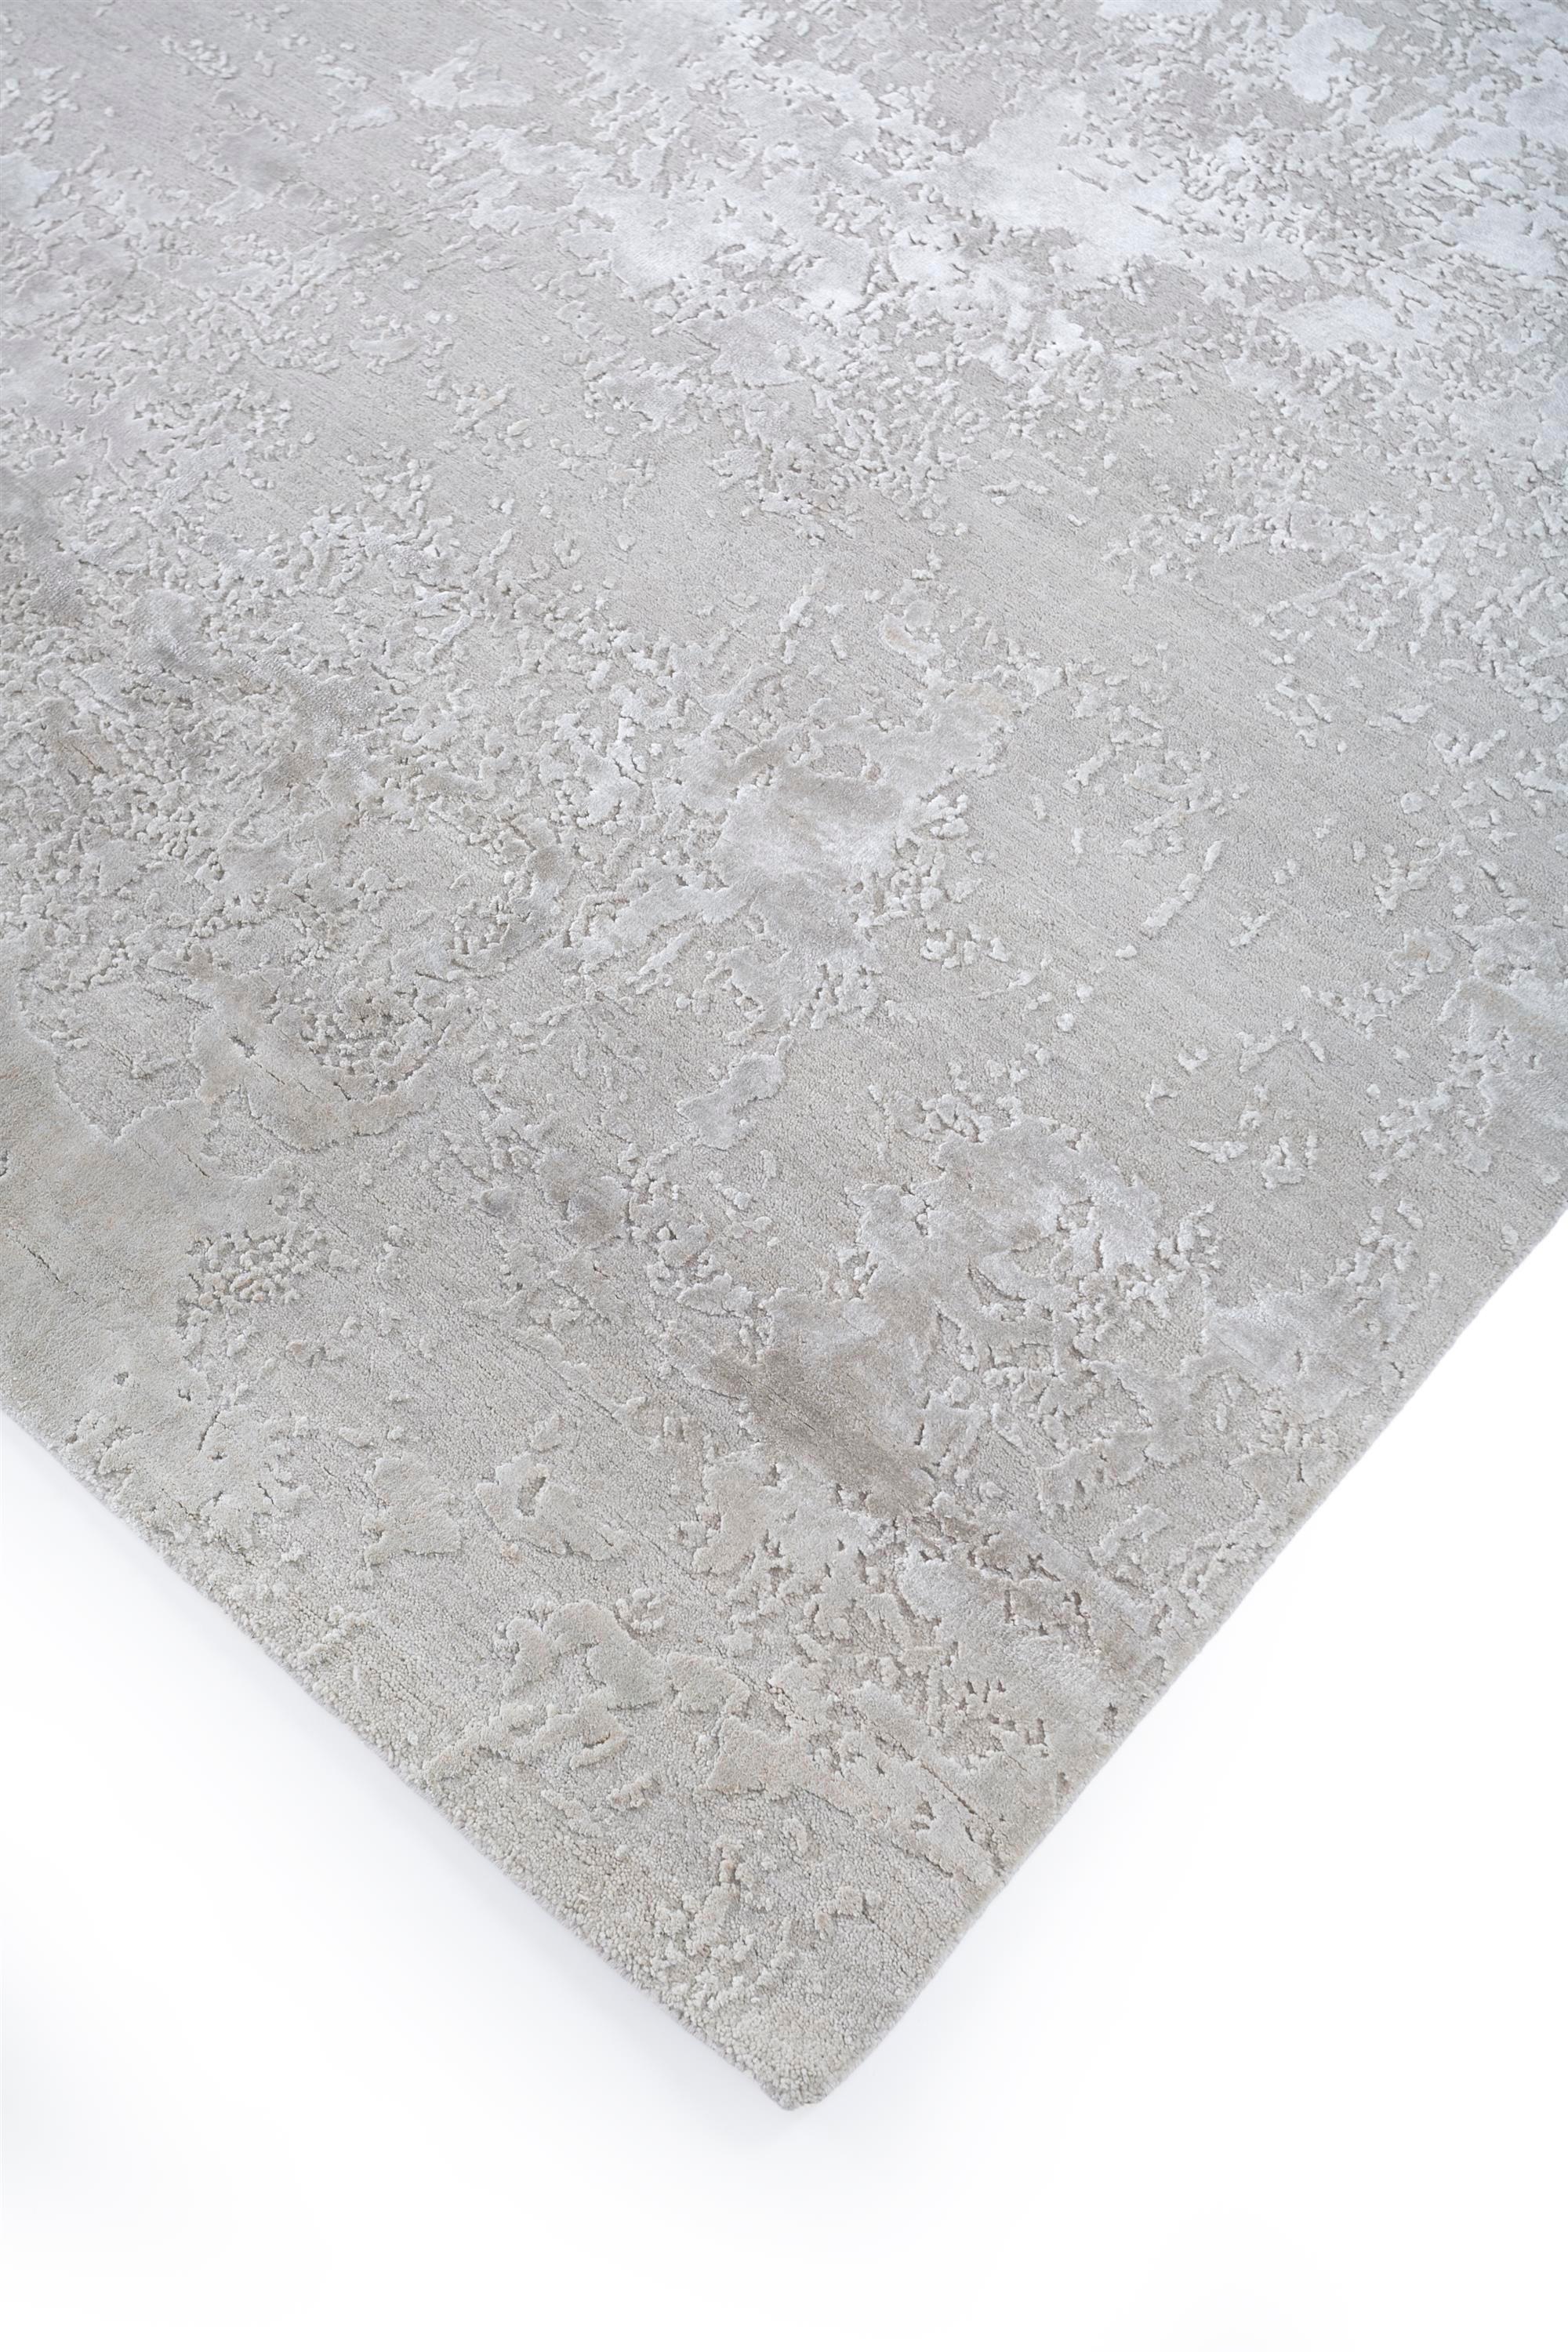 A harmonious blend of nature and technology in a muted color palette of ivory and flask! This hand-knotted rug artfully captures the beauty of imperfections, seamlessly incorporating misprints and nature's subtle disruptions into its design.